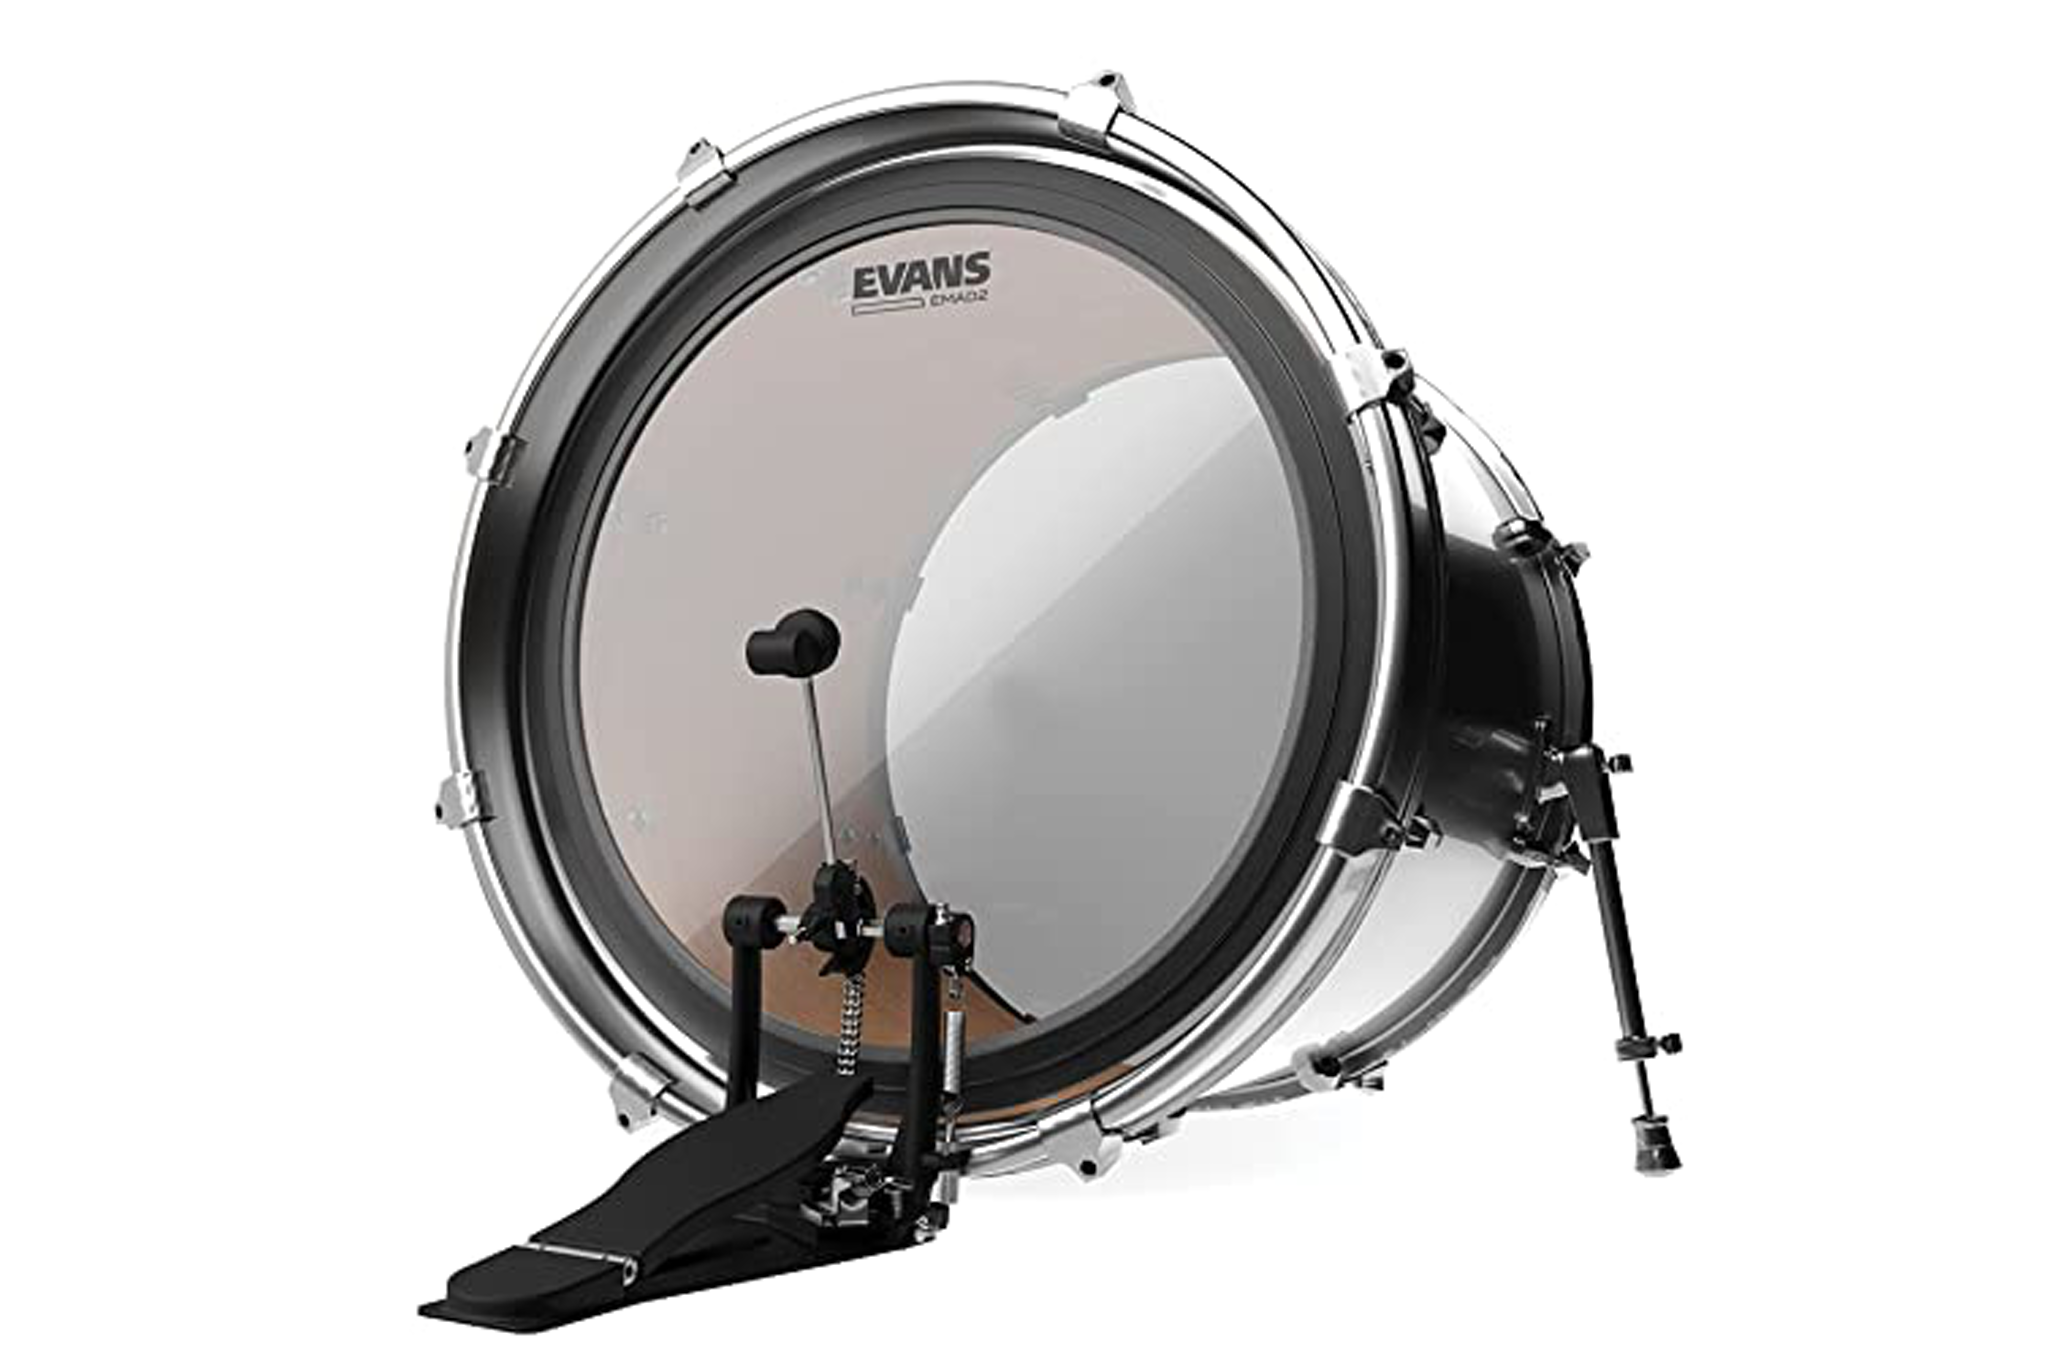 Evans BD22EMAD2 Clear Bass Batter Head - 22 inch